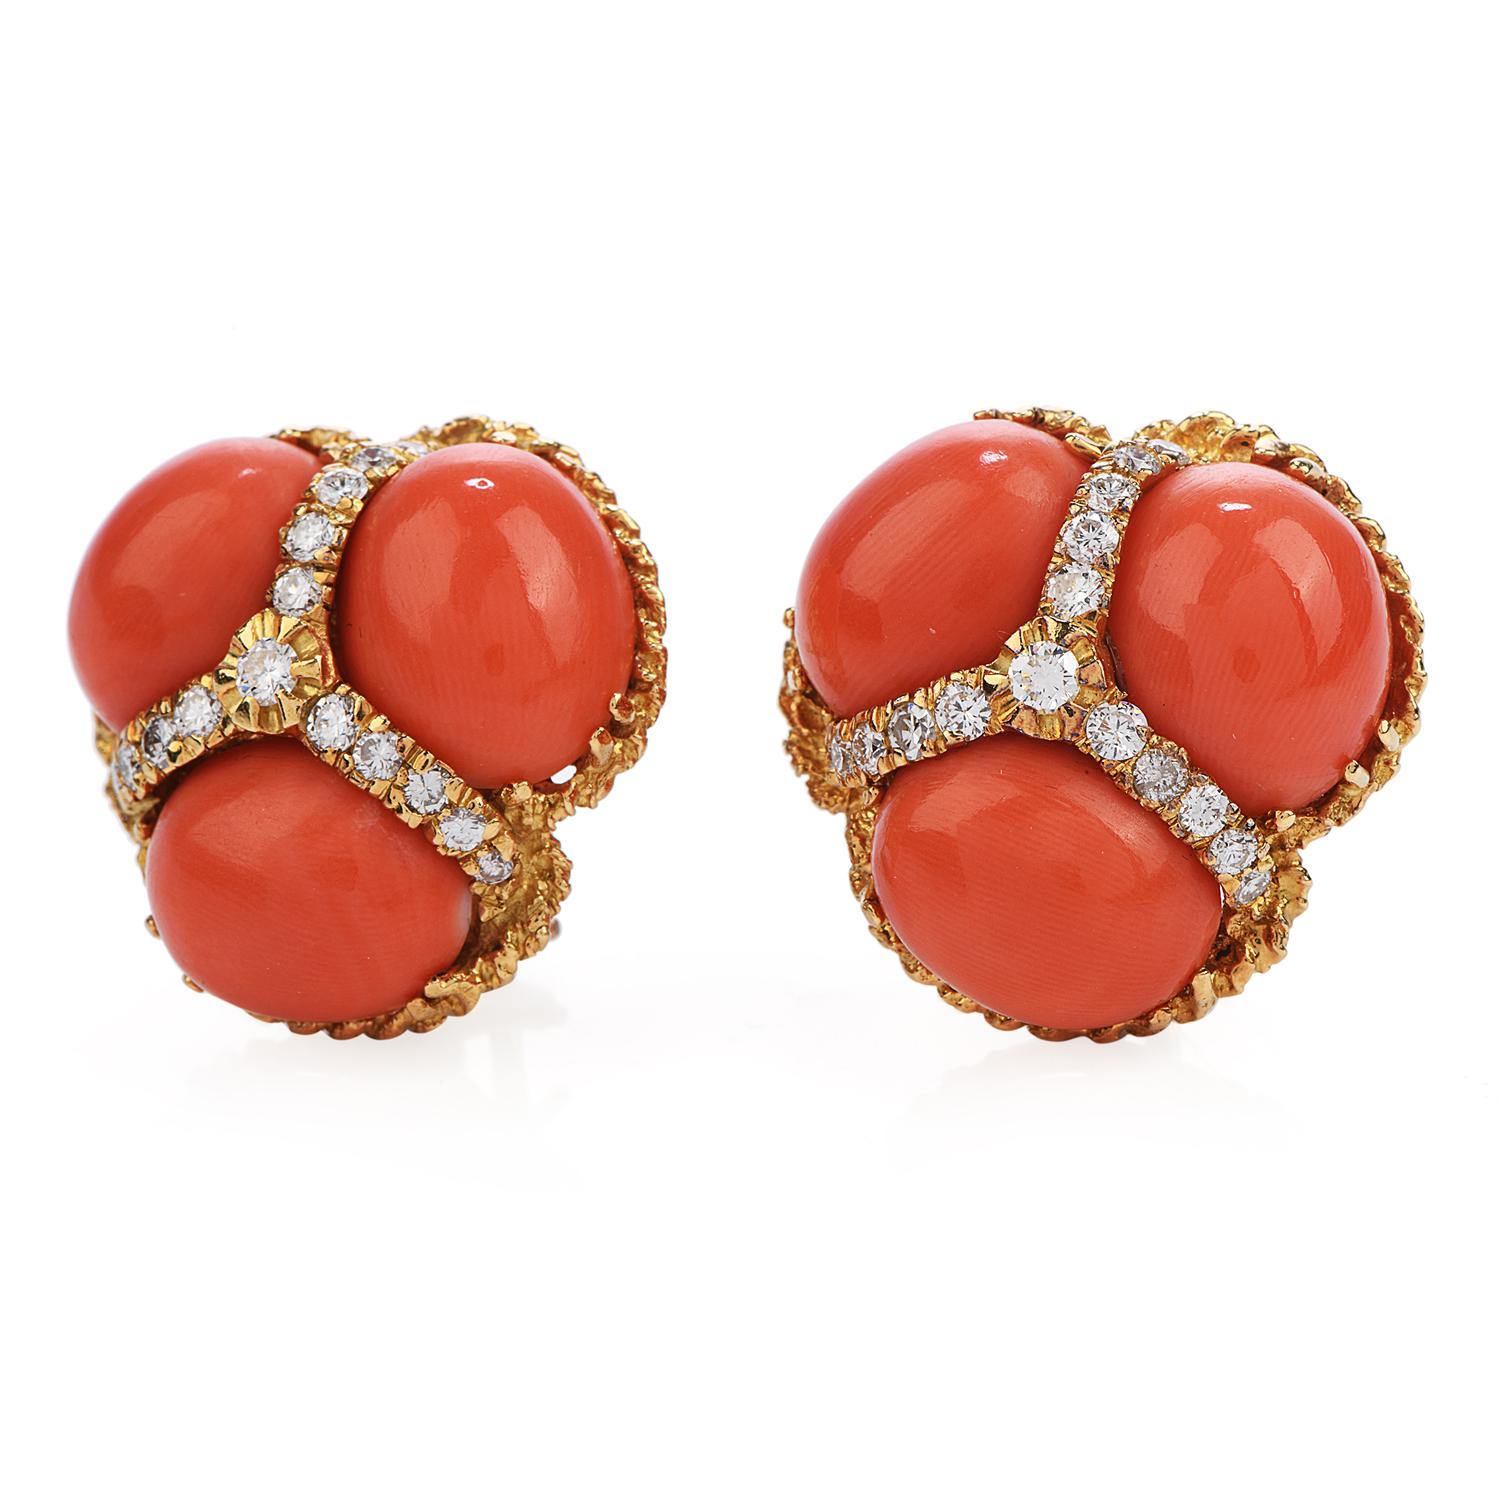 These trending vintage earrings are crafted in finely textured 18K yellow gold, each set with three oval shape cabochon genuine natural red Coral measuring 12mm x 9mm. Corals are separated by natural genuine diamonds weighing approx. approx.